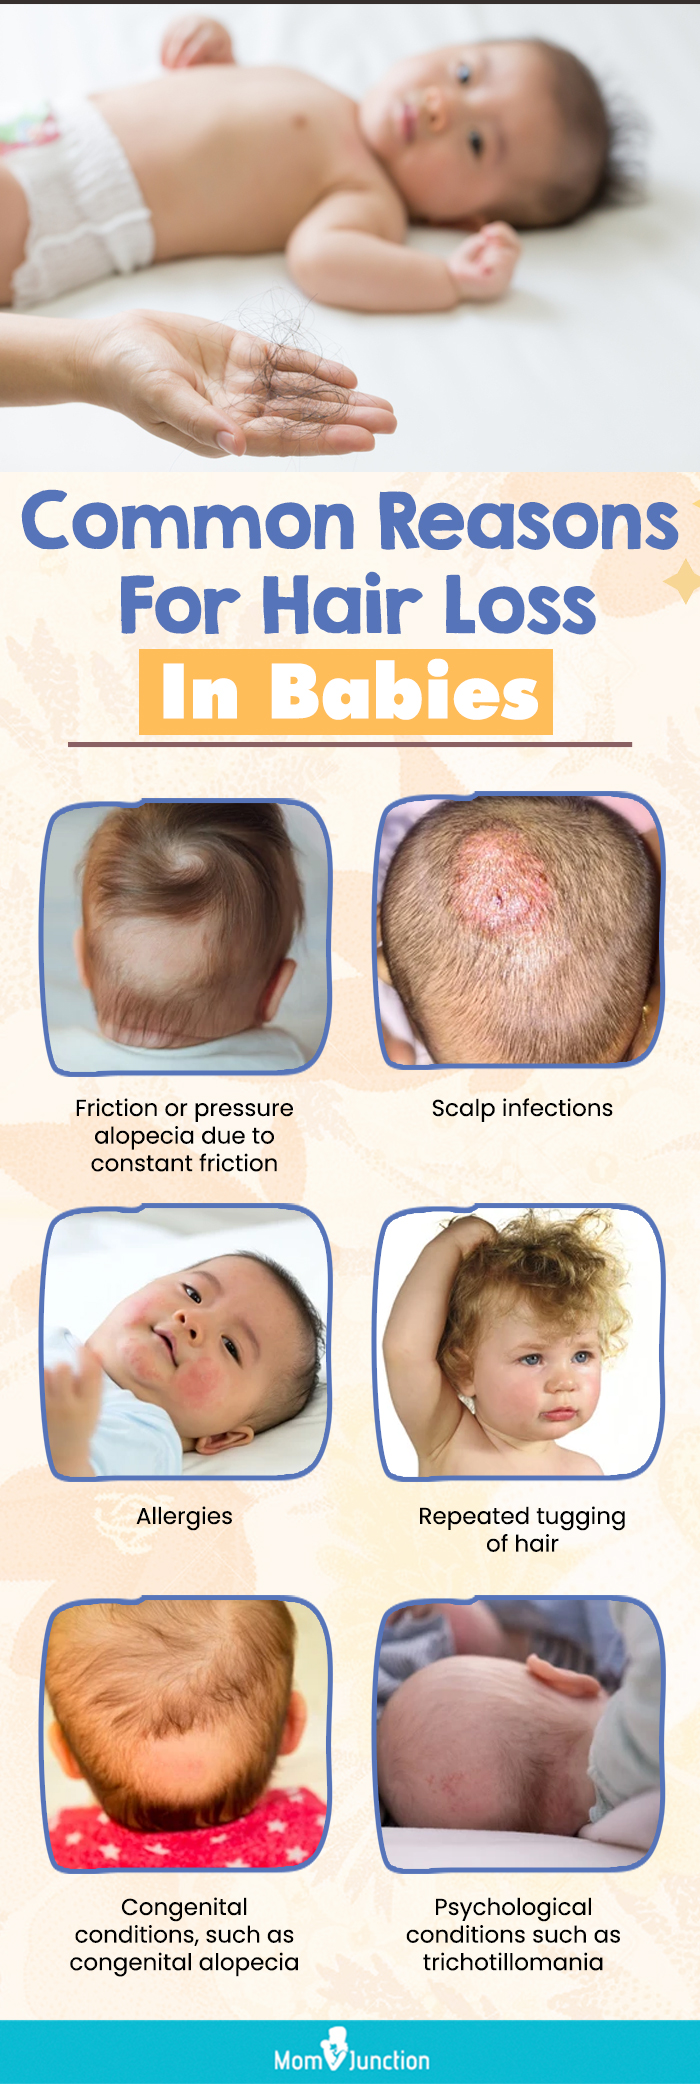 common reasons for hair loss in babies (infographic)